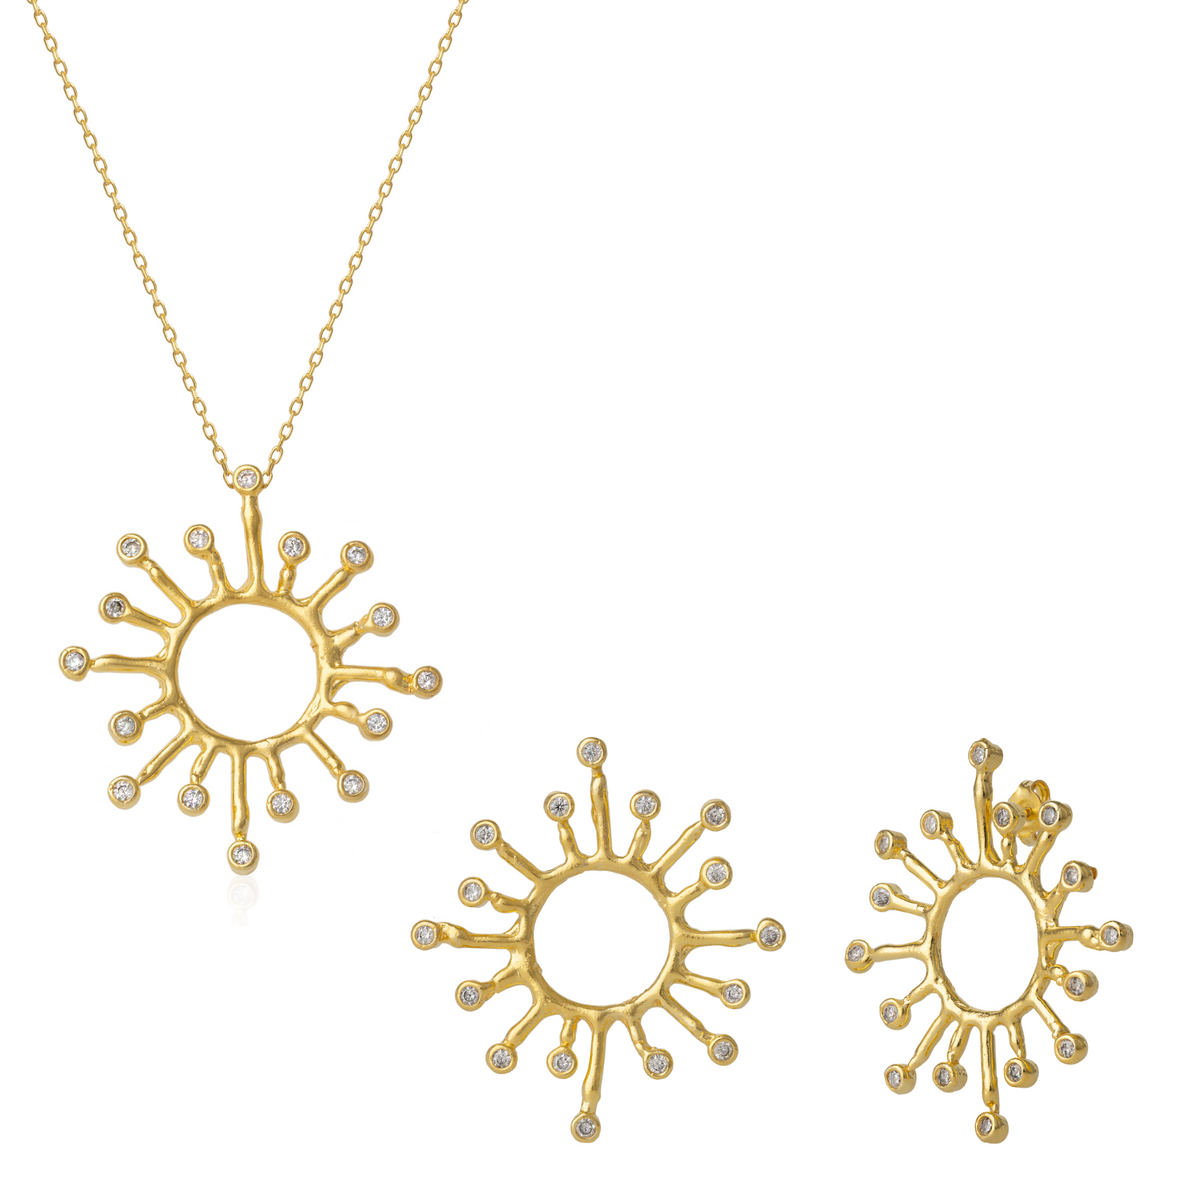 Sun Sunburst Large Textured Molten Sterling Silver Earring and Necklace Set